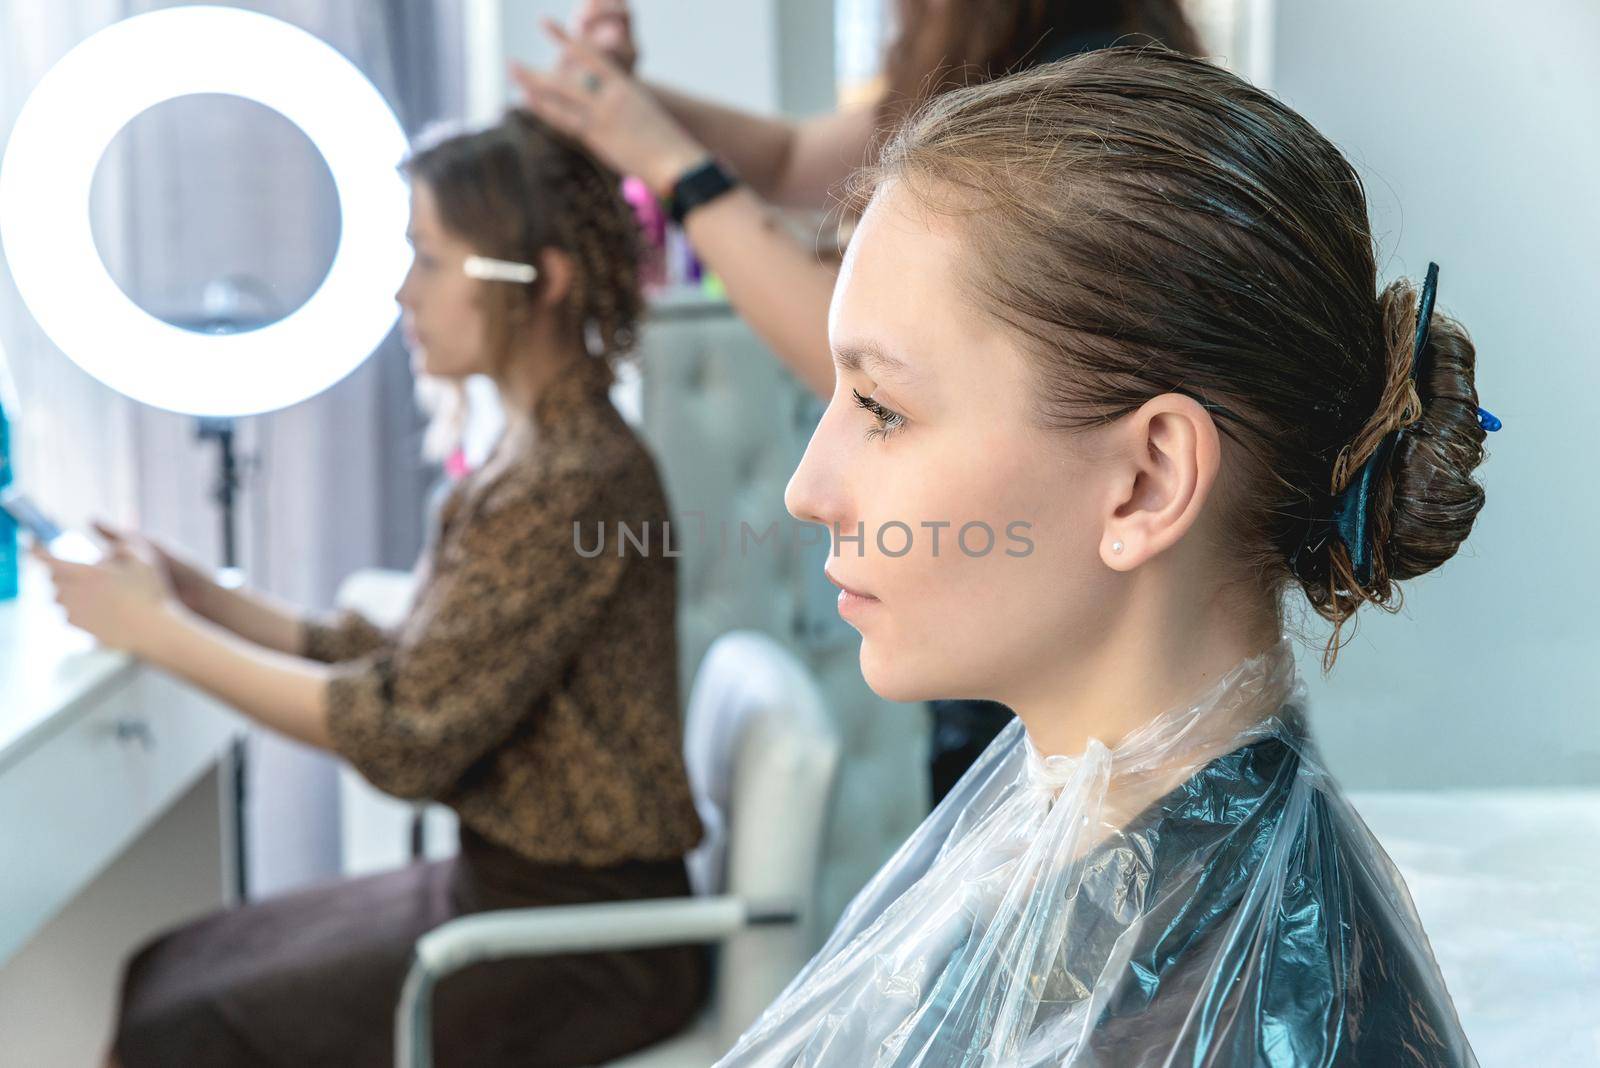 hair coloring in a beauty salon, young girl during dyeing process by Mariakray